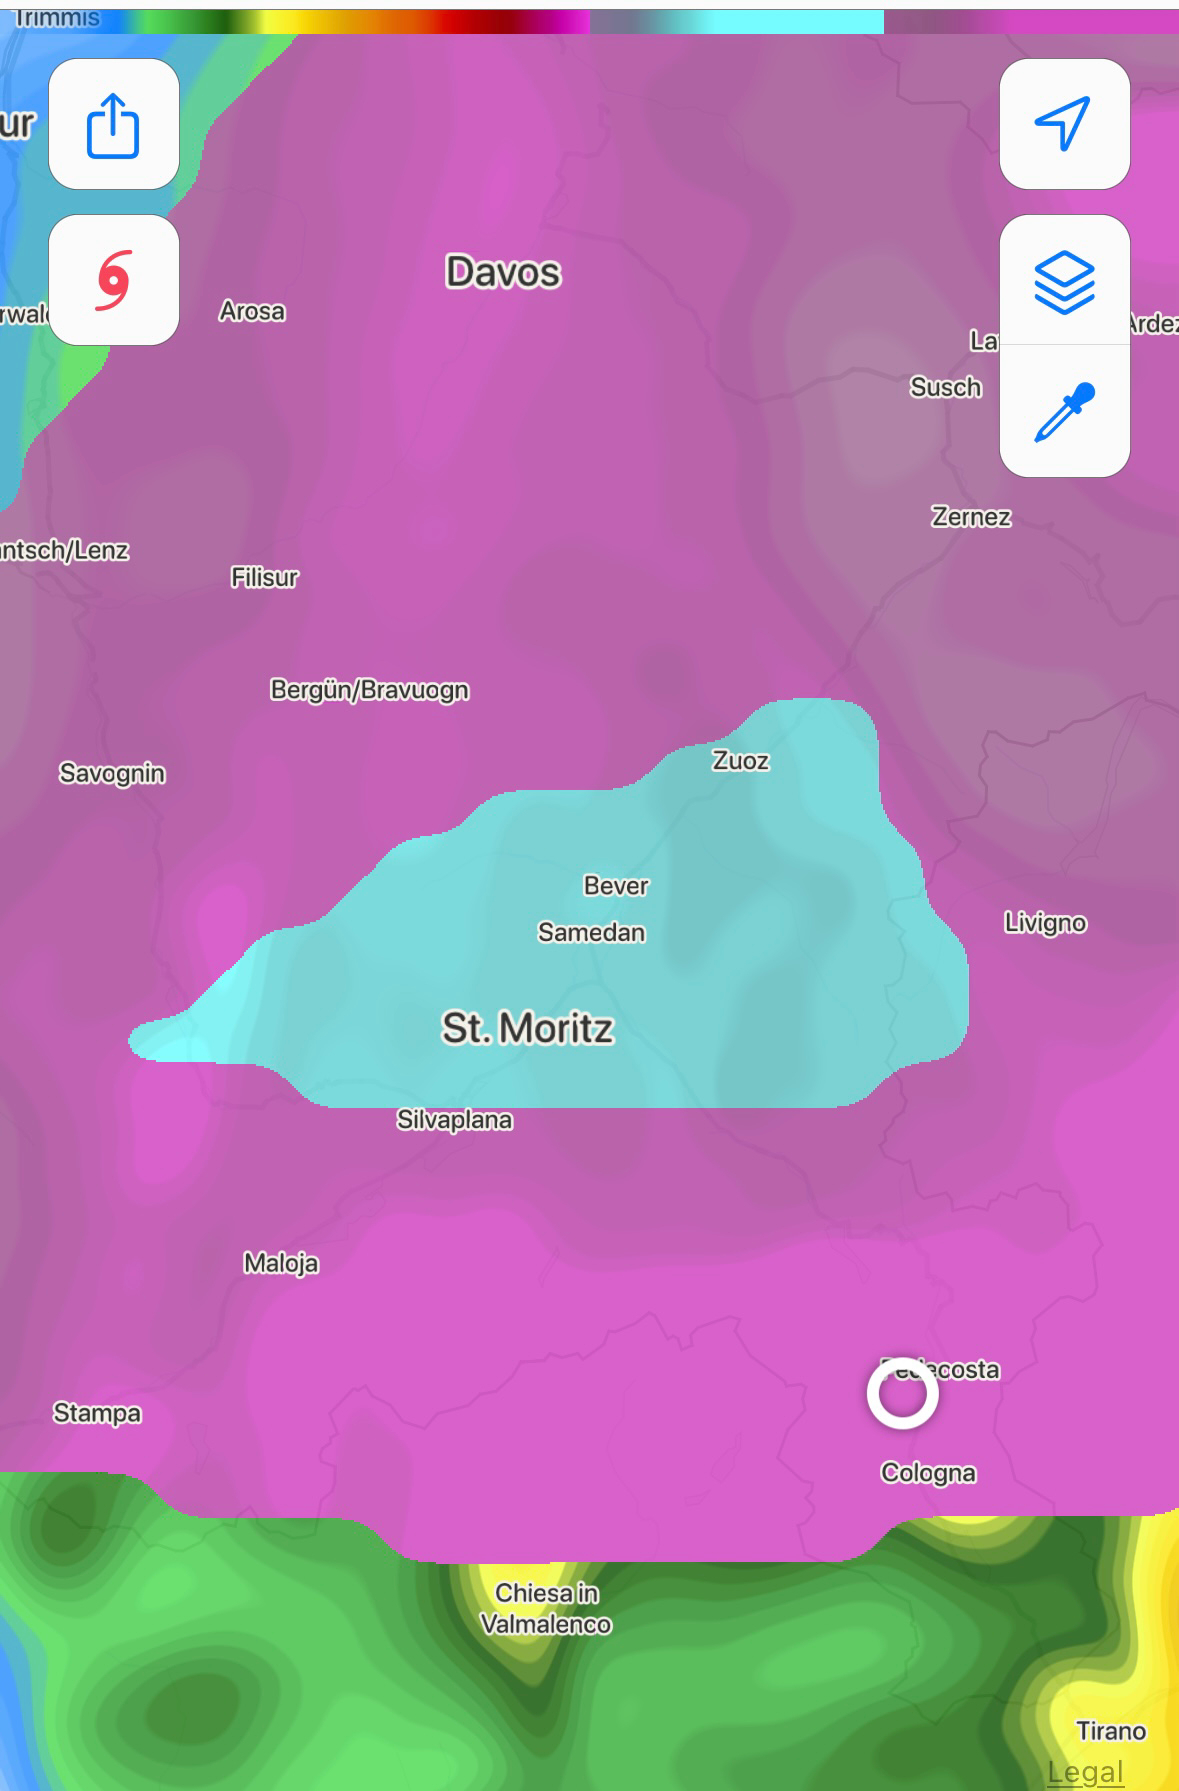 A weather map showing temperature gradients in a region that includes cities like Davos, St. Moritz, and Livigno. The map uses color coding to indicate different temperature zones. Snow is indicated in a ring around St. Moritz. 